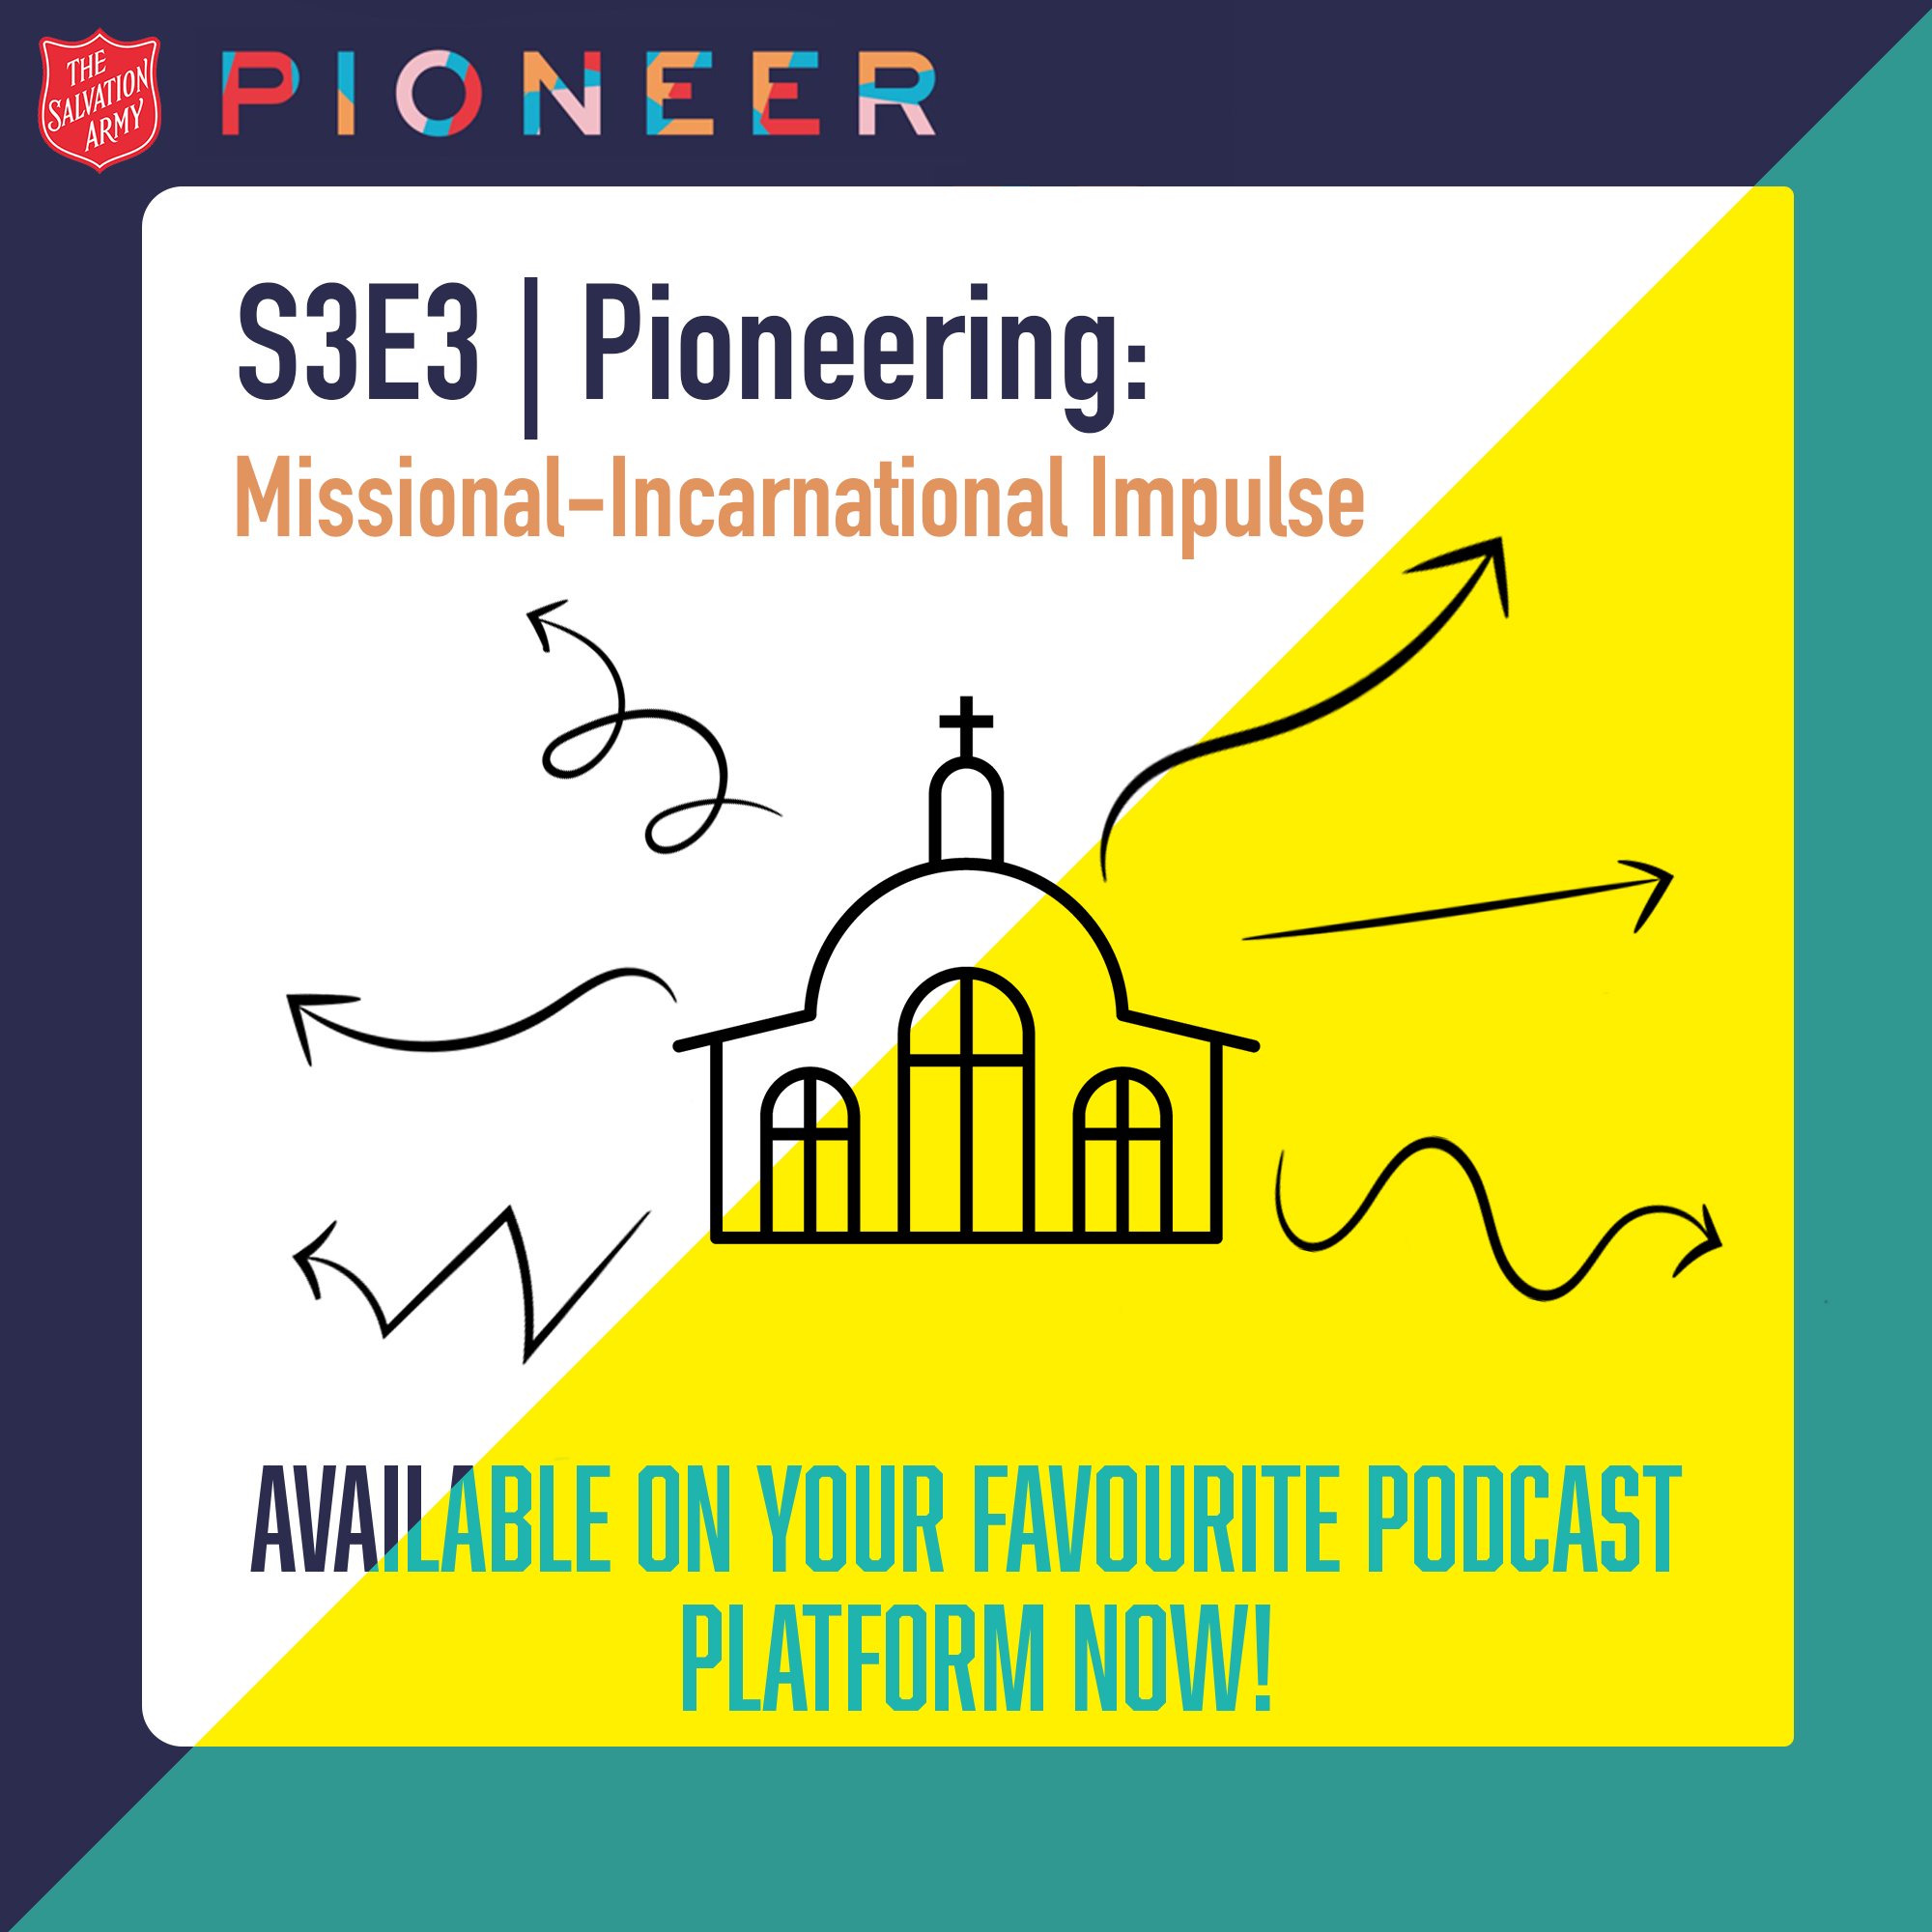 Artwork for podcast SA Pioneering